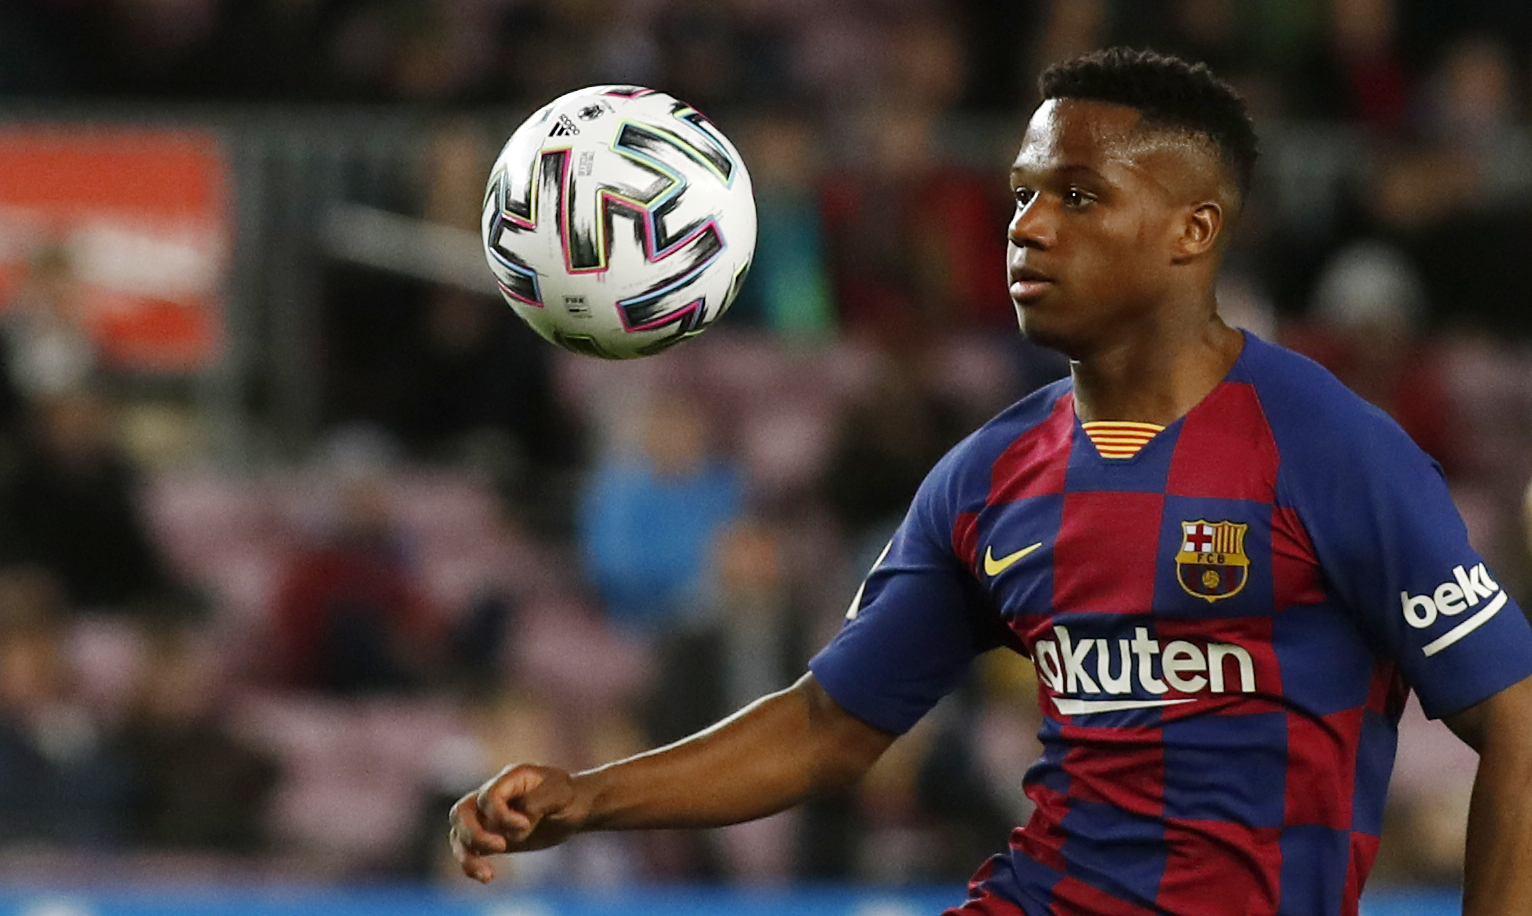 Barcelona vs Leganes line-ups: Ansu Fati joins Messi and Griezmann in attack